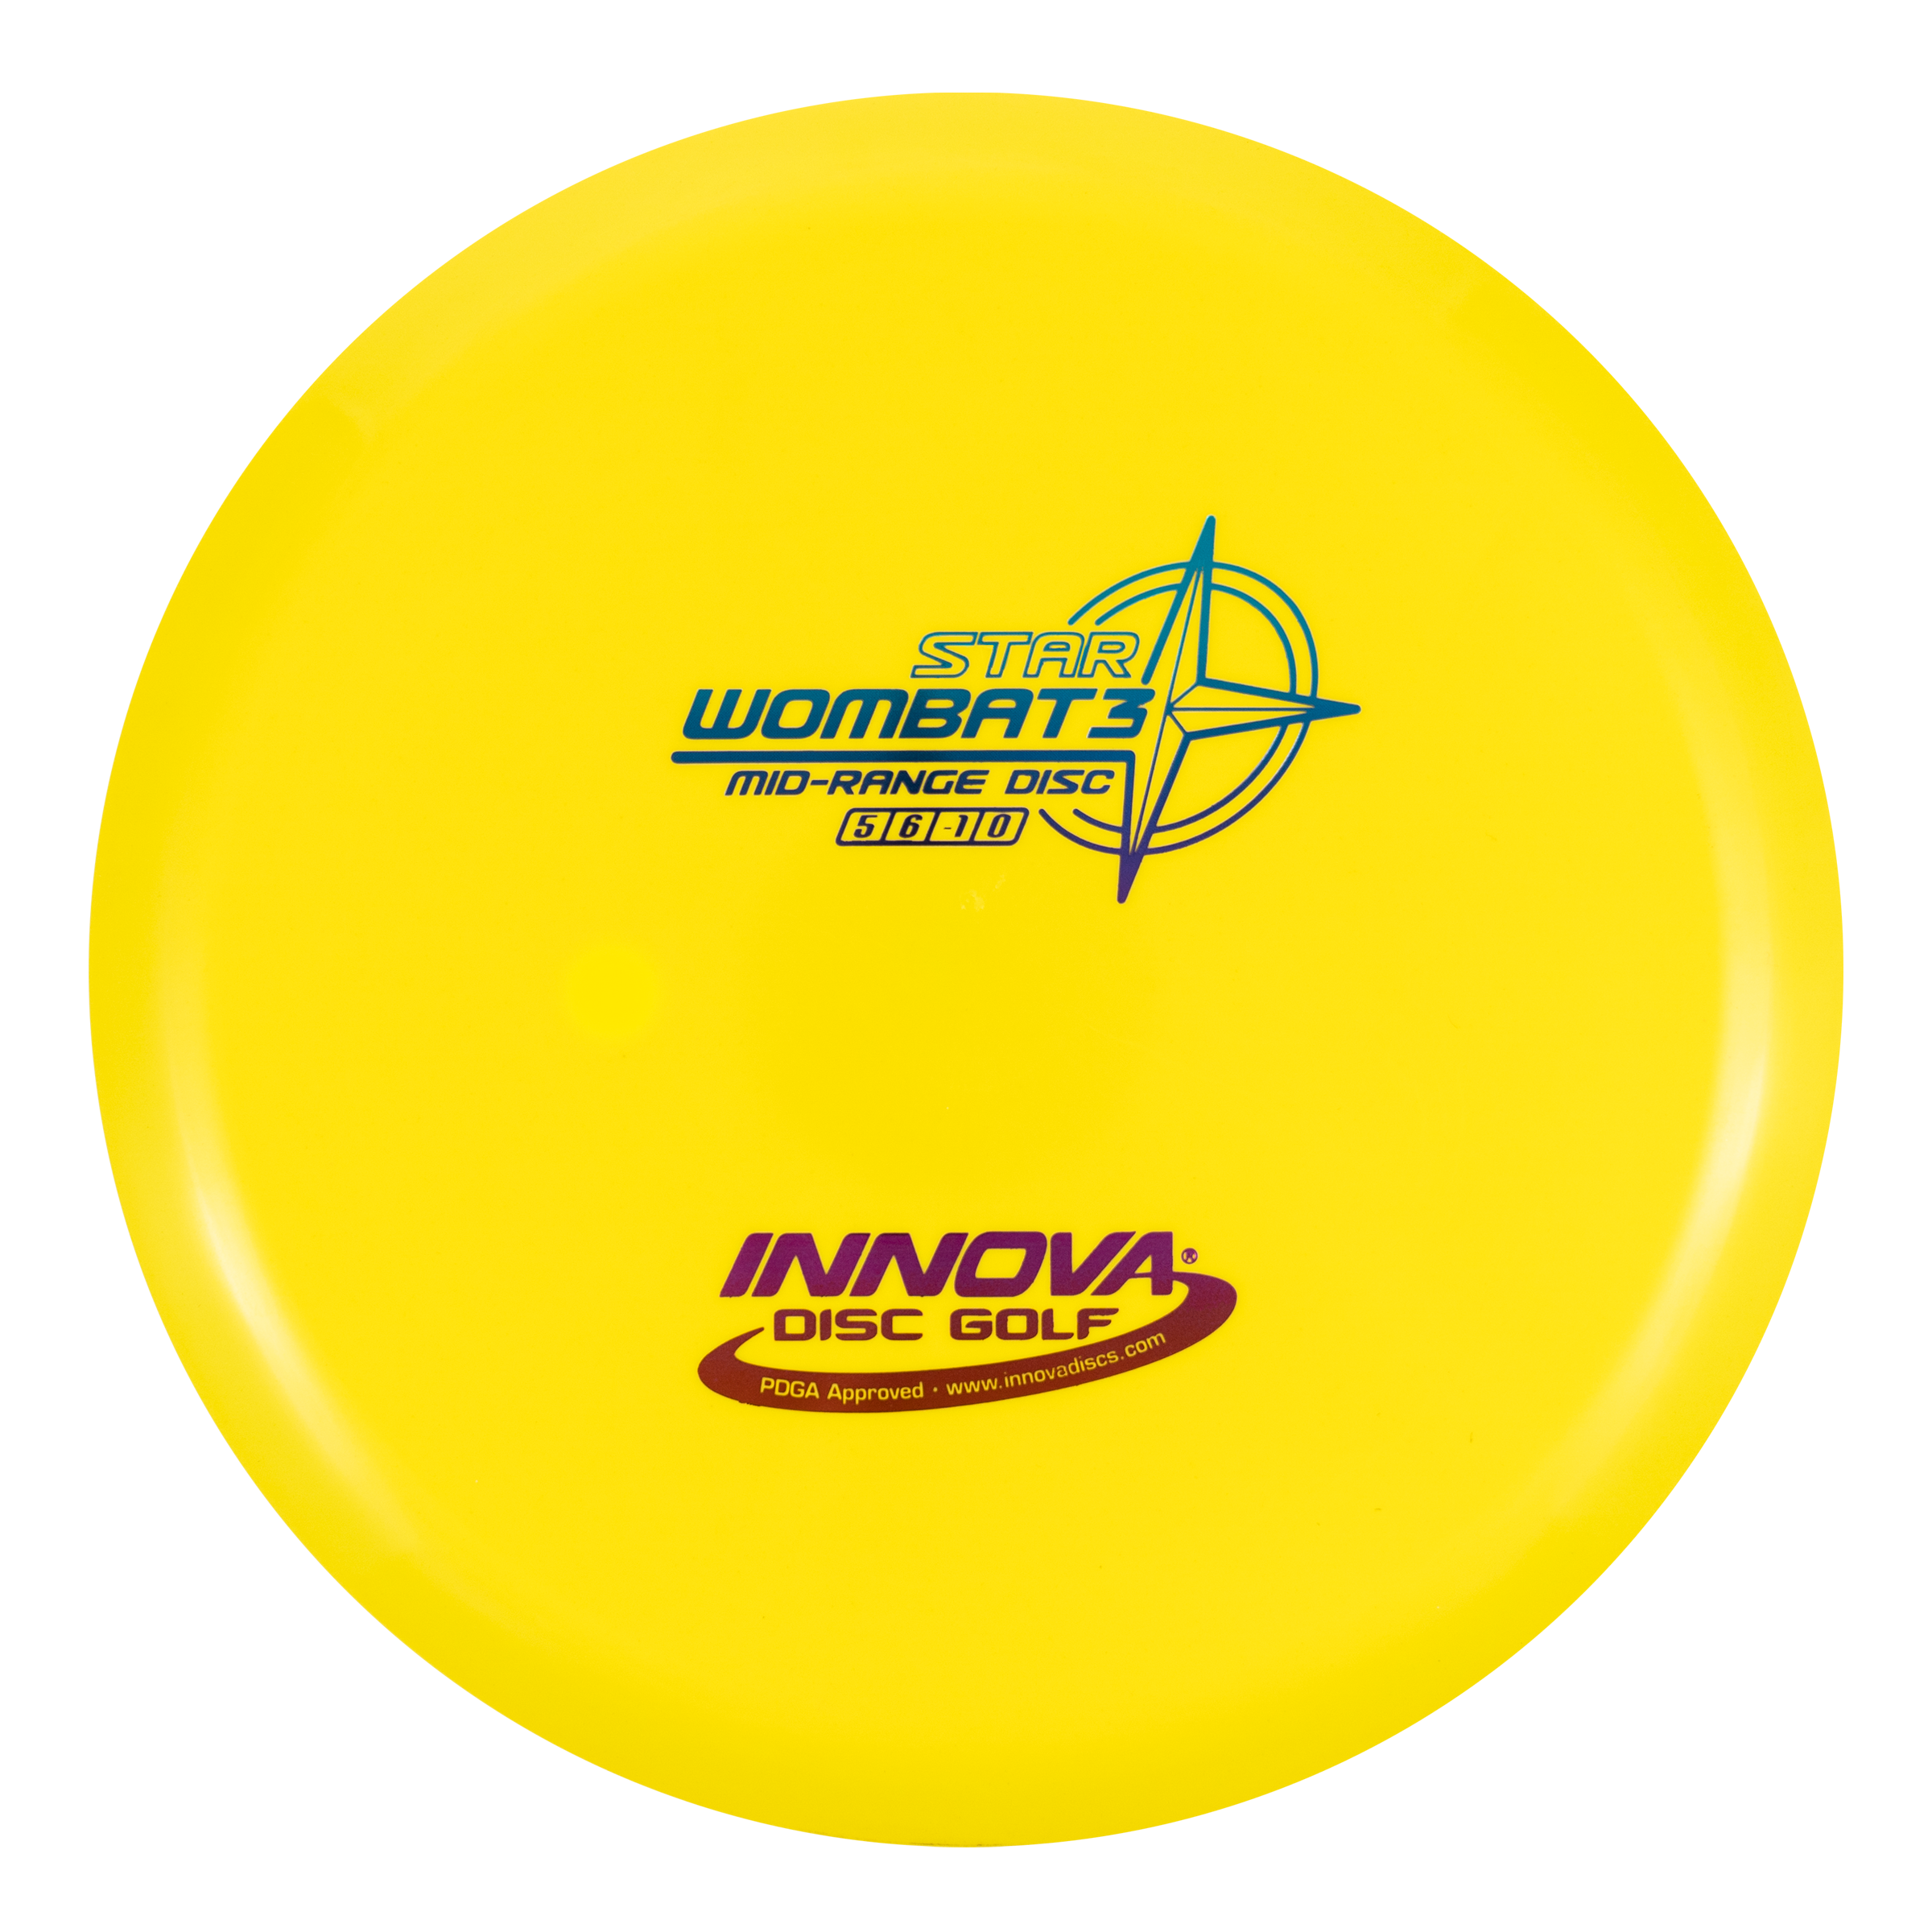 Product Image for Innova Star Wombat3